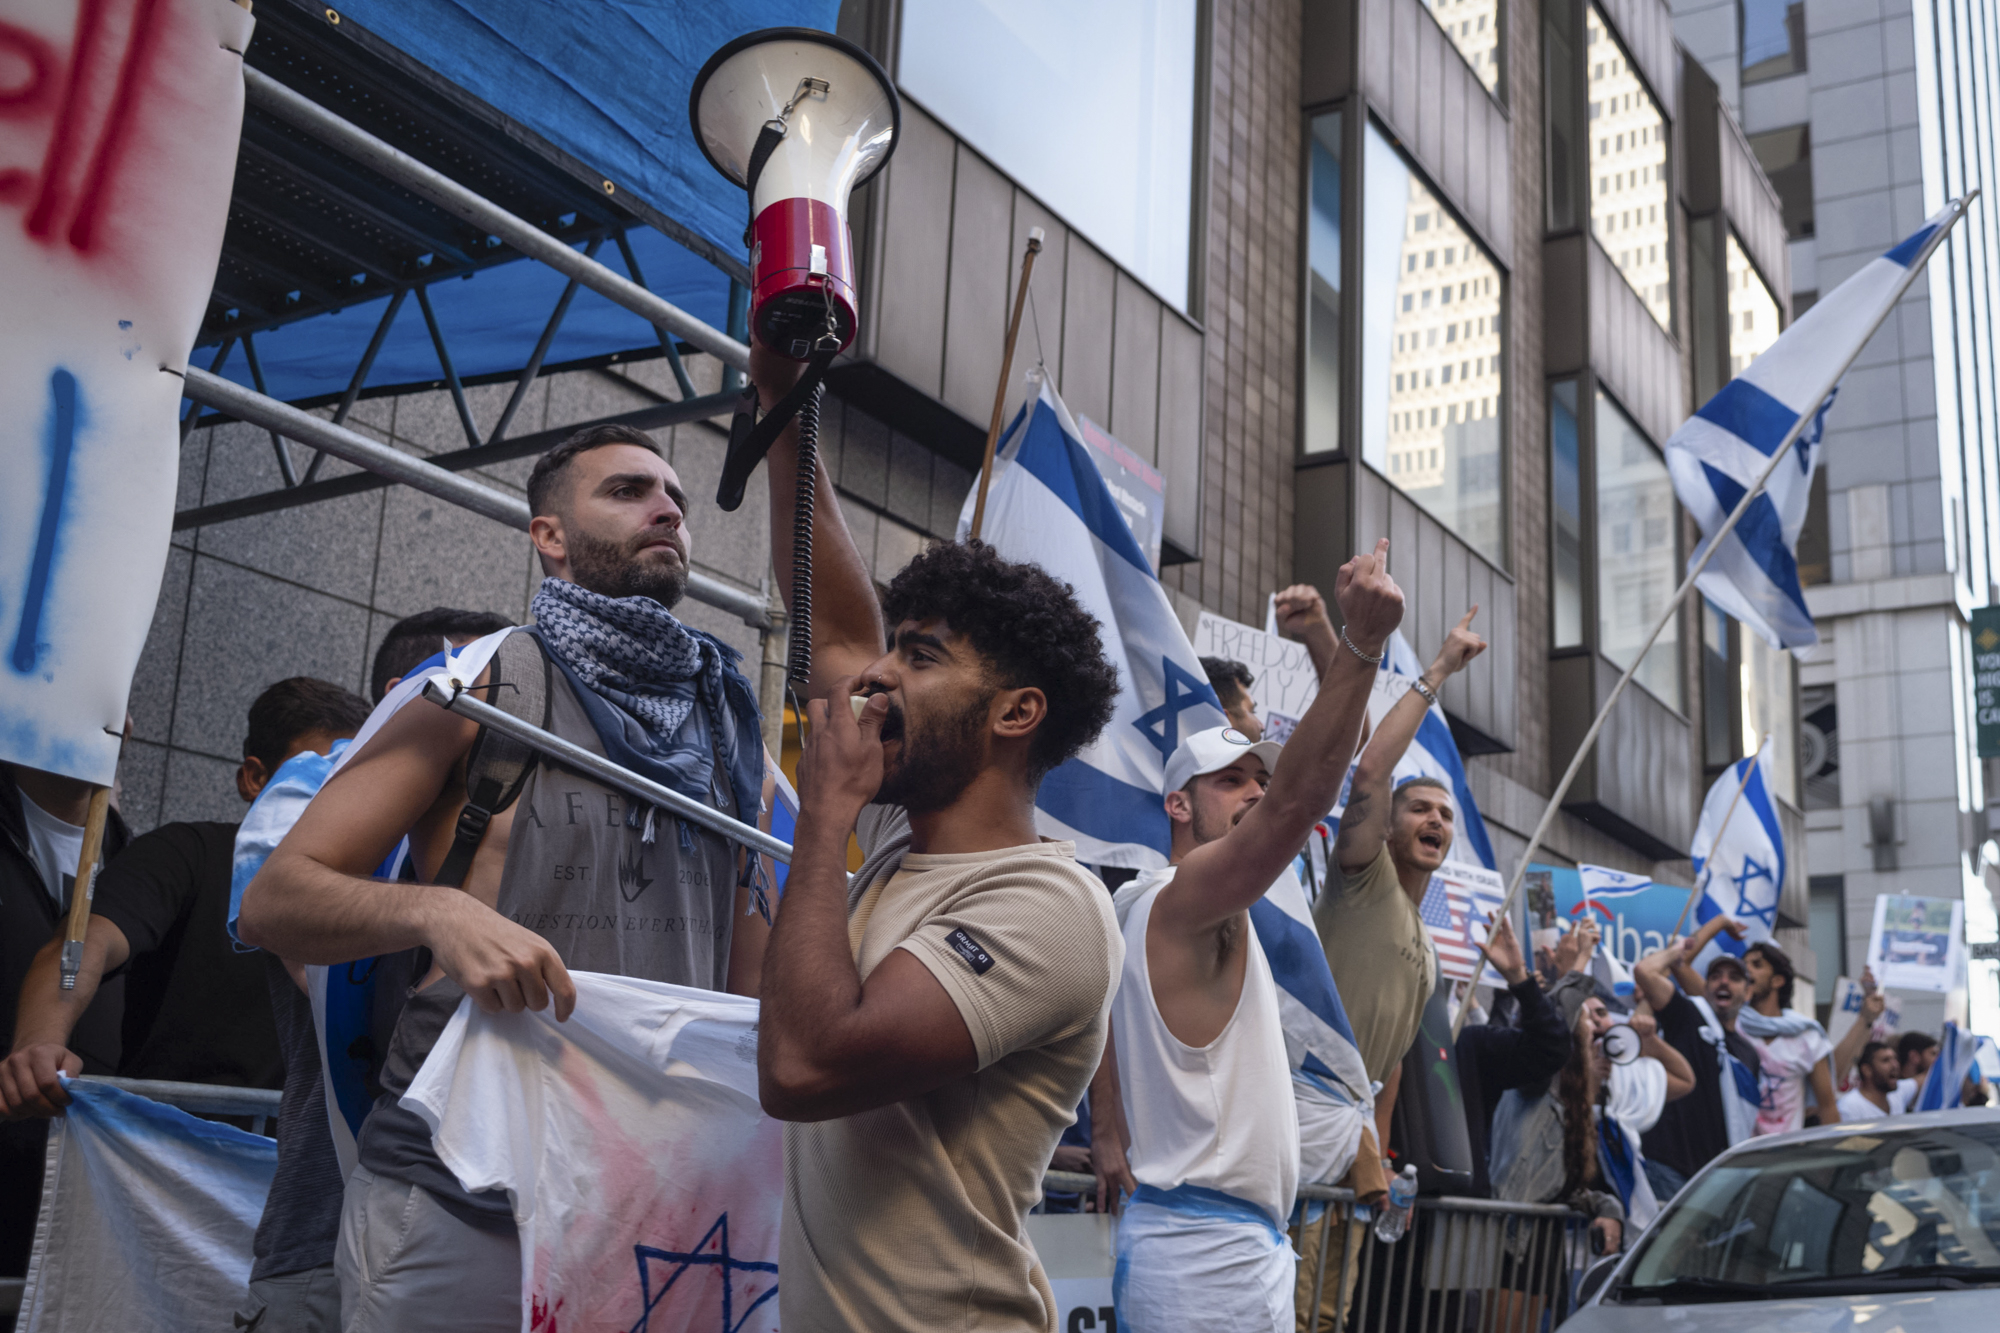 A group of people holding white and blue flags chant and yell in an urban setting.